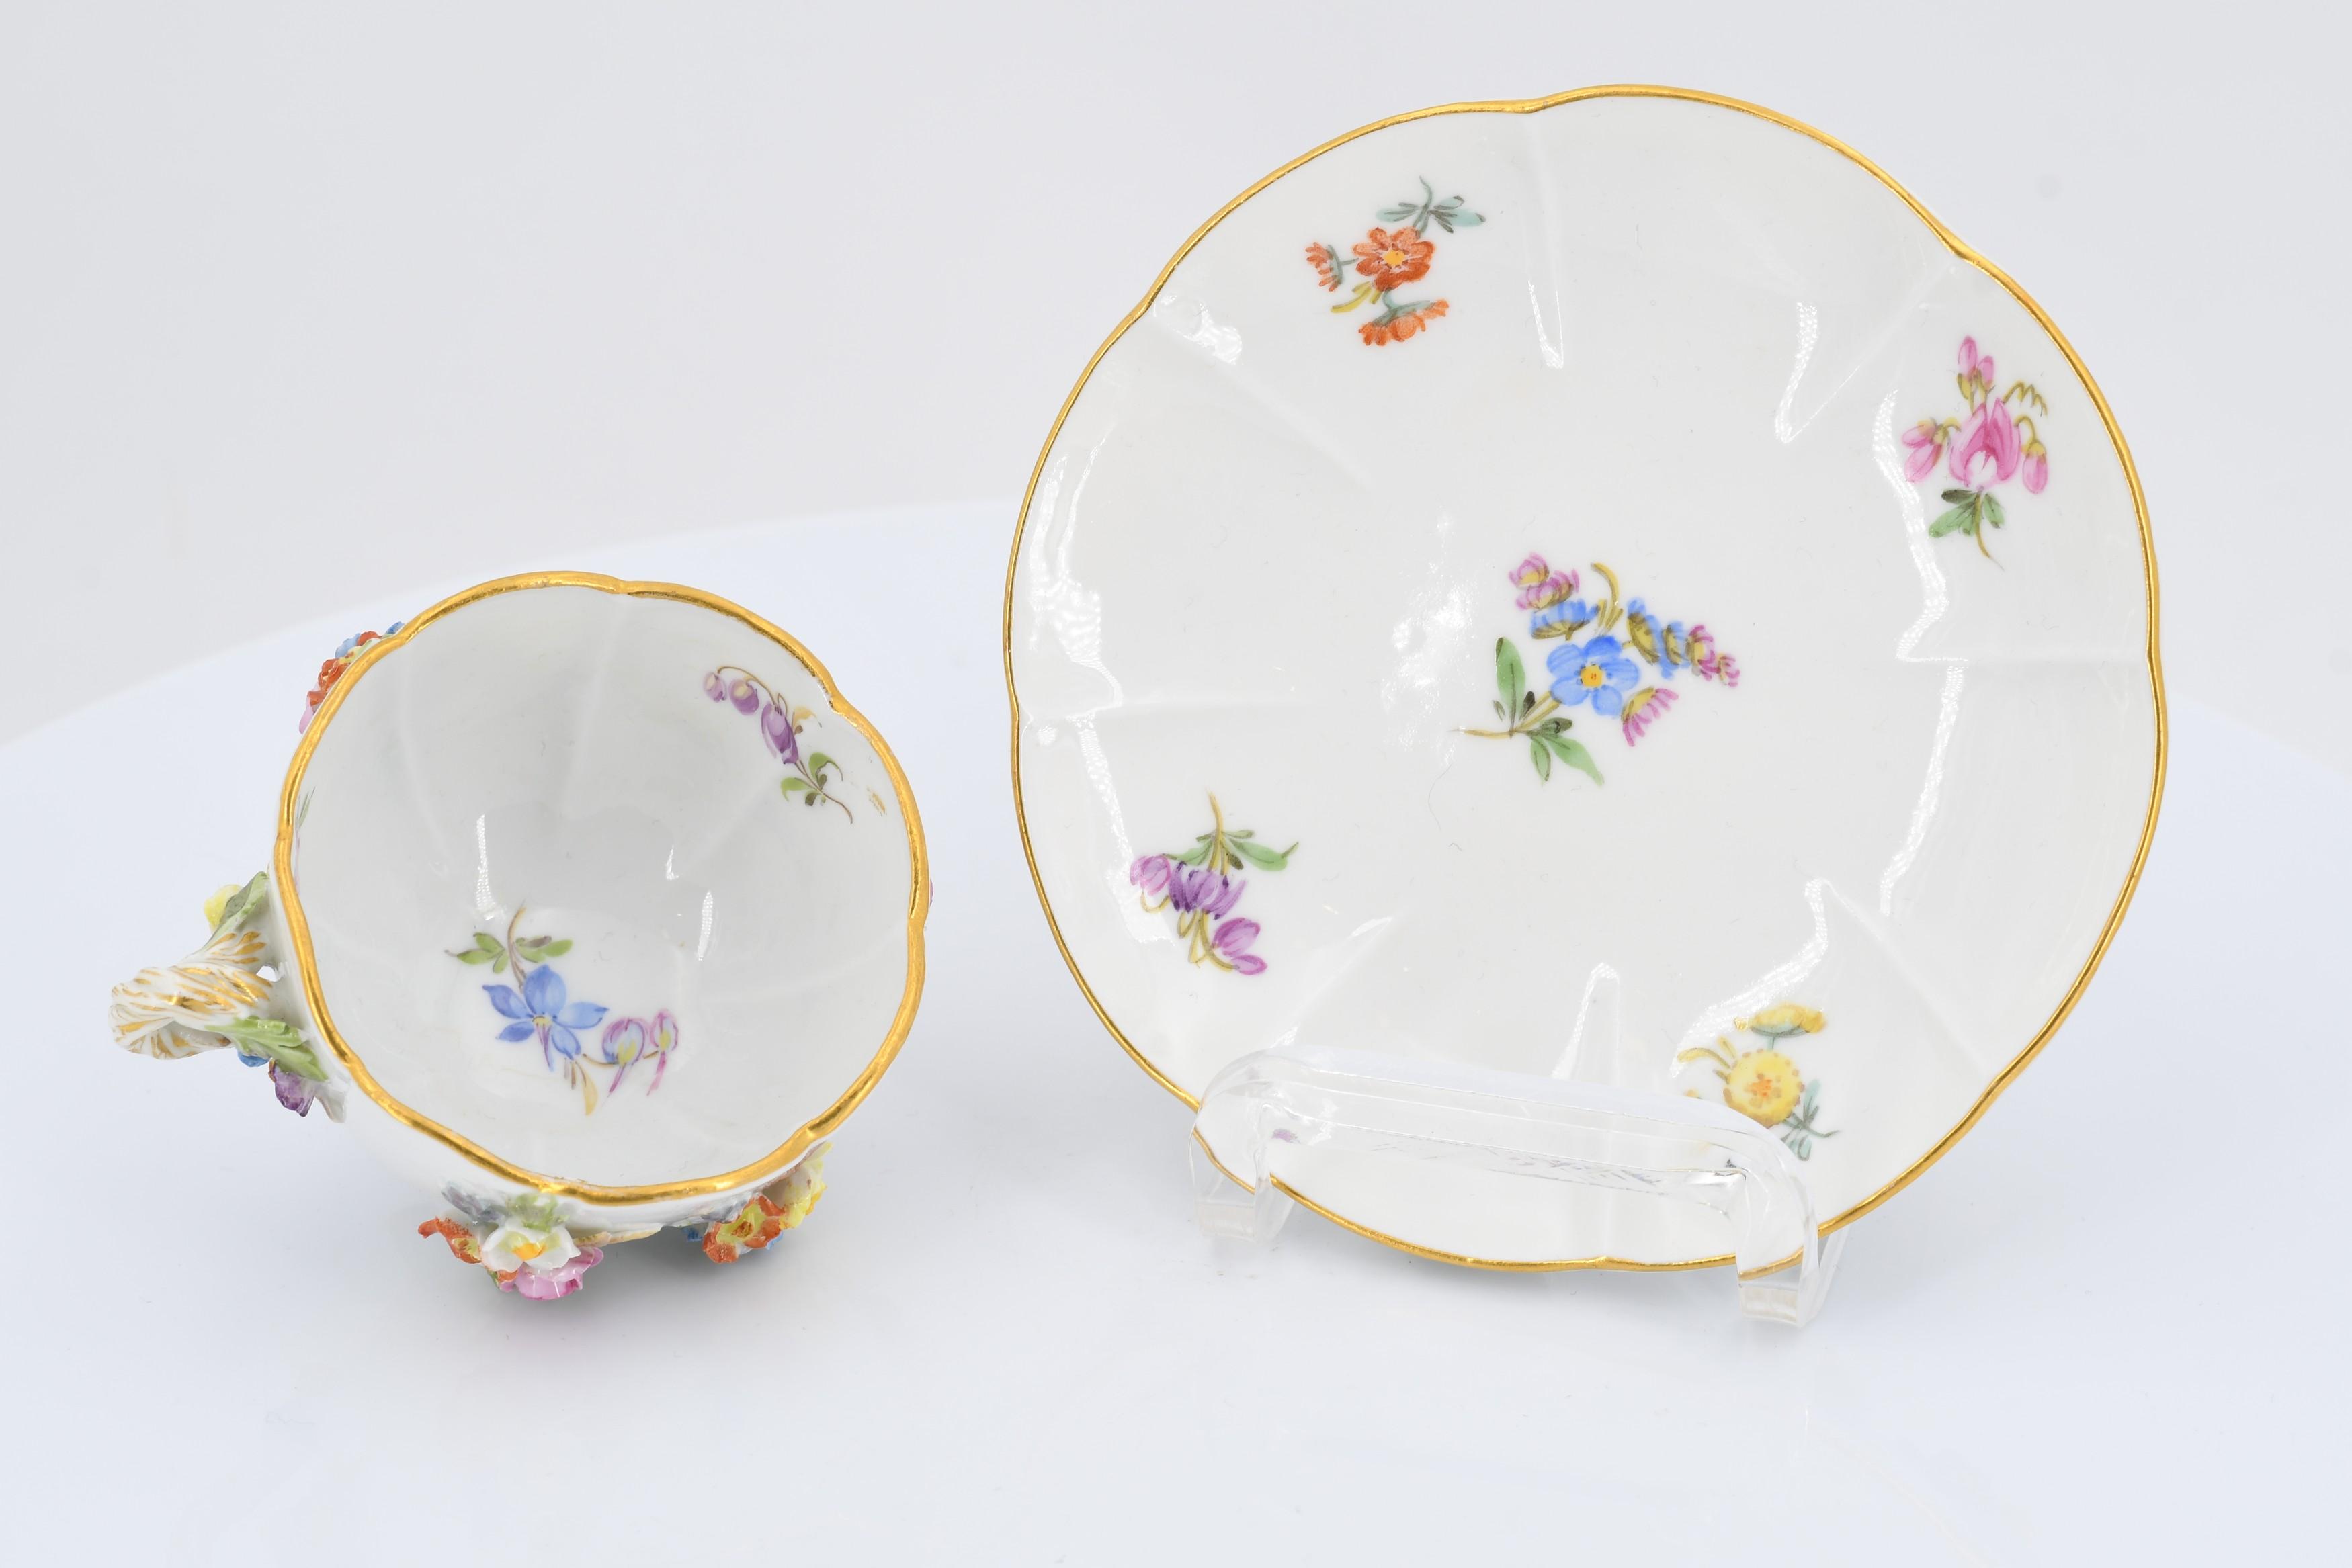 Jug and three cups with saucers decorated with applied flowers - Image 6 of 12